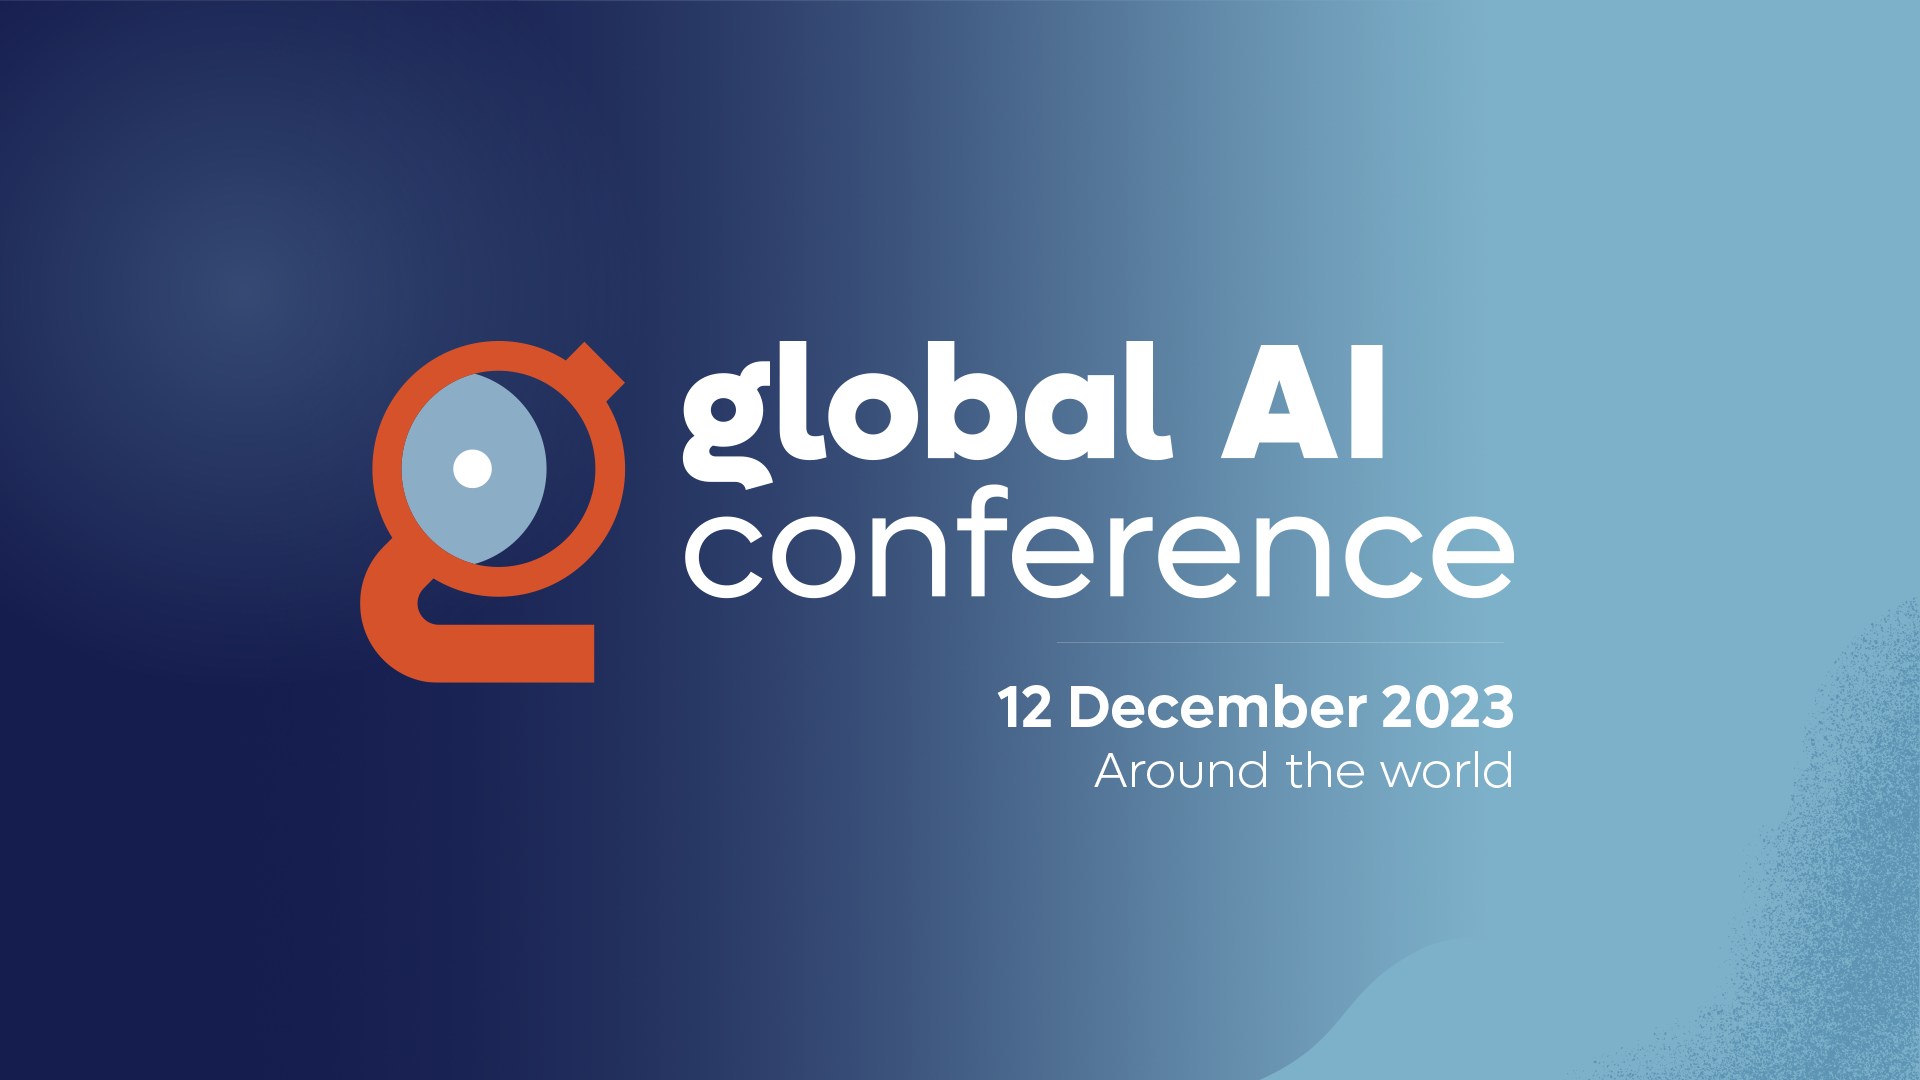 Global AI Conference 23